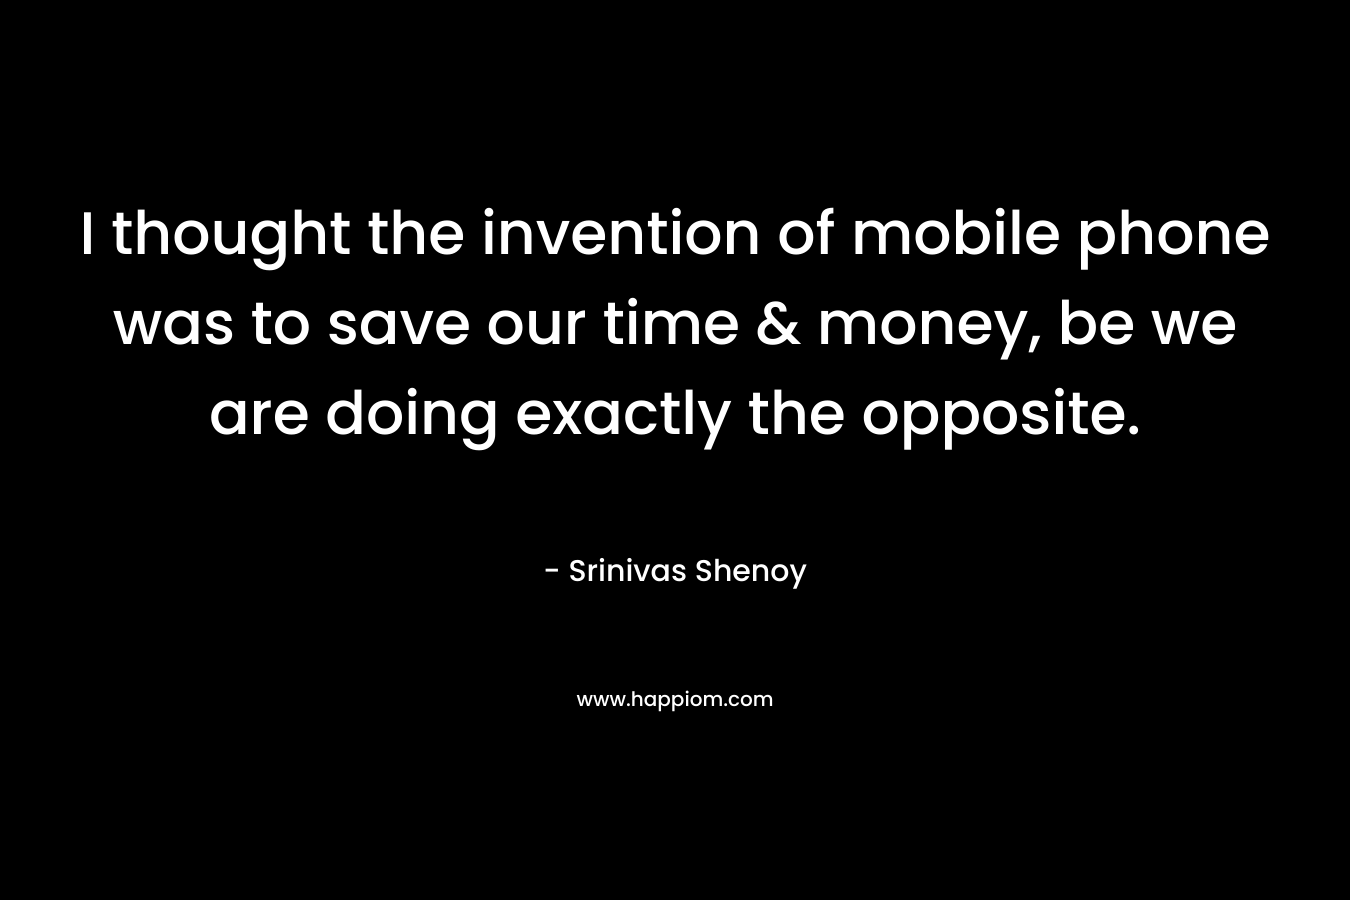 I thought the invention of mobile phone was to save our time & money, be we are doing exactly the opposite. – Srinivas Shenoy